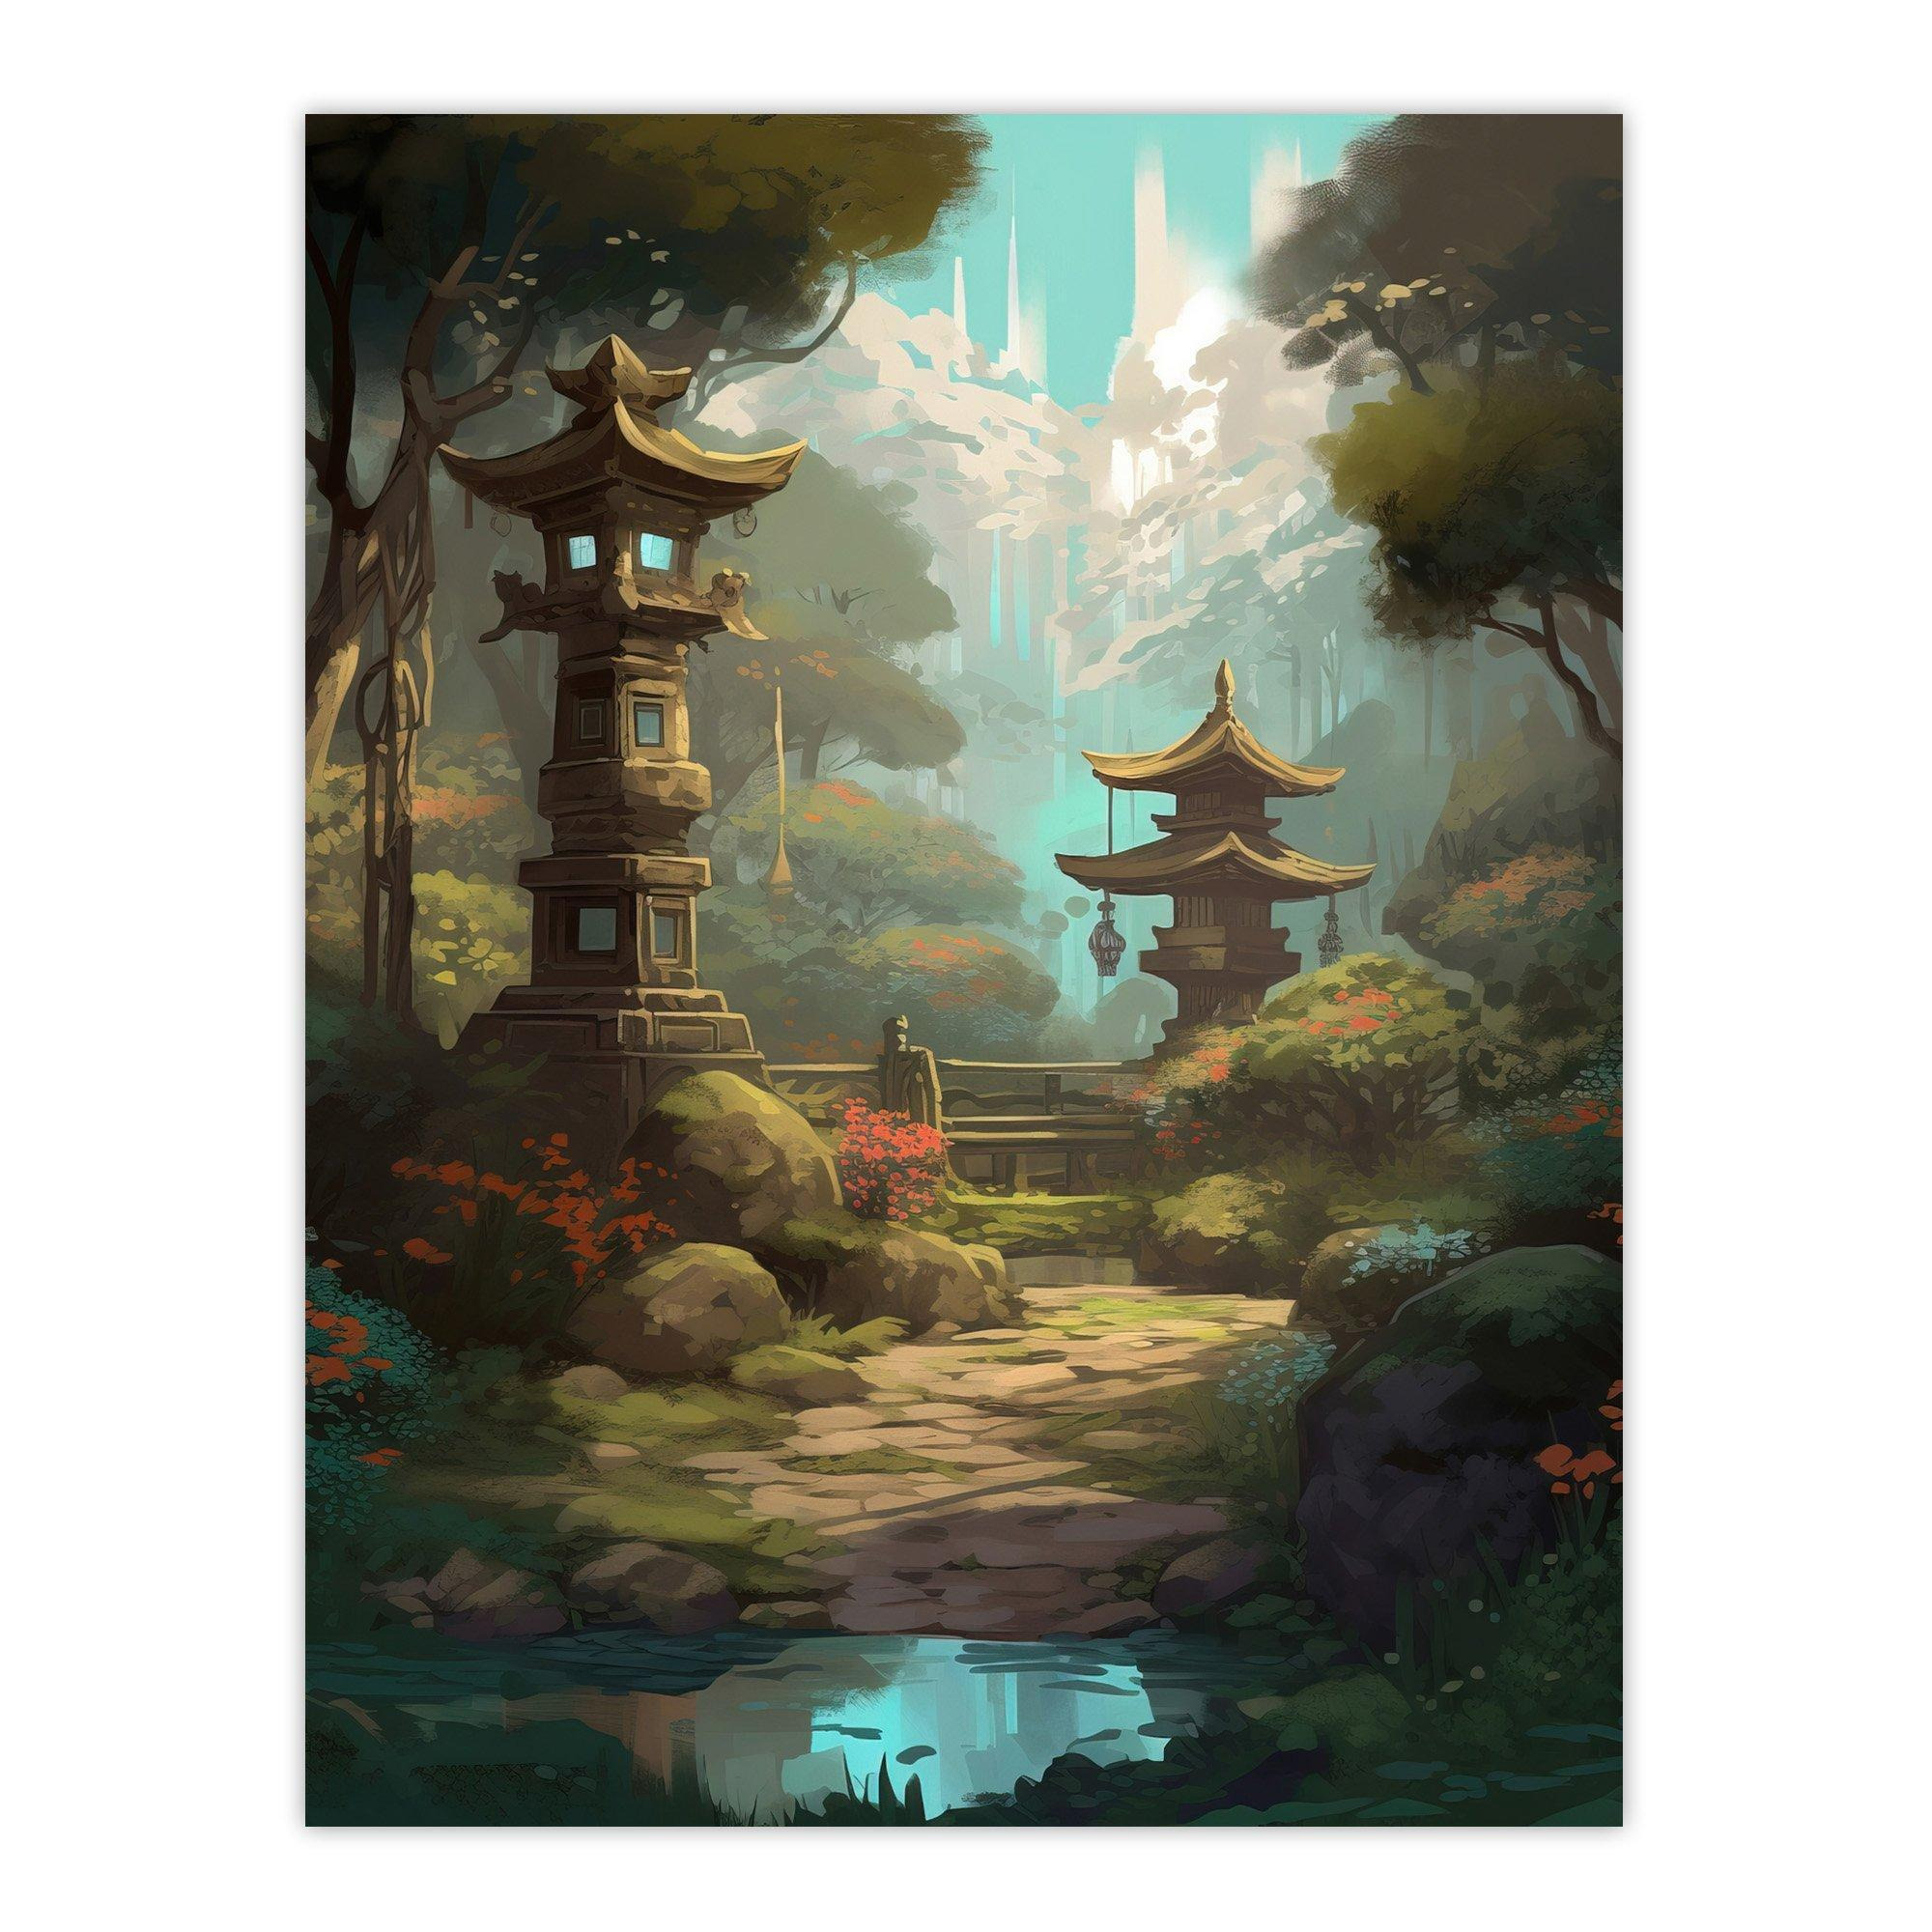 Traditional Japan Garden Painting with Towers and Stone Lanterns Bright Lake Spring Landscape Unframed Wall Art Print Poster Home Decor Premium - image 1